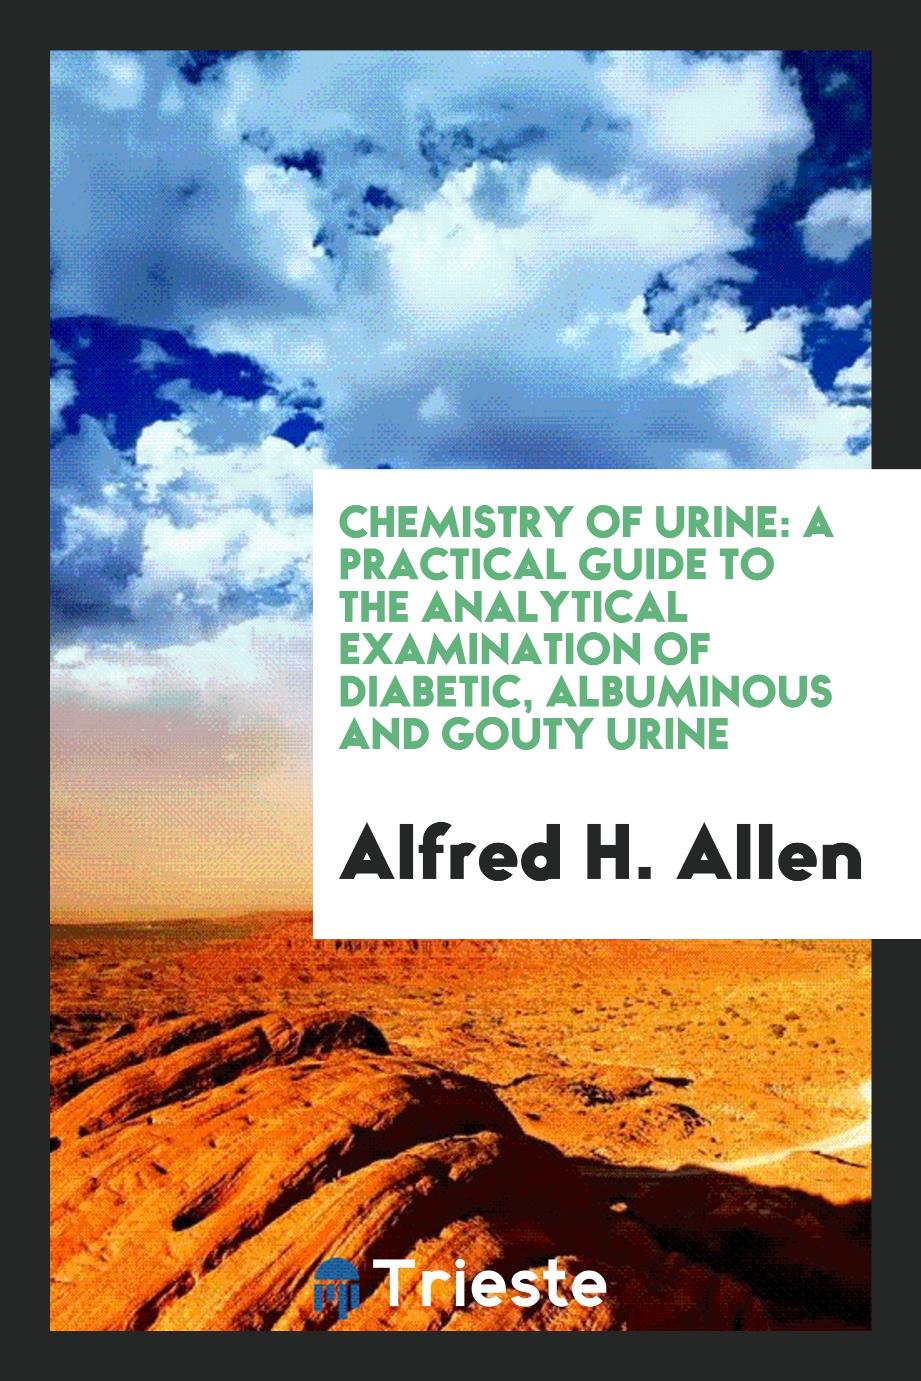 Chemistry of urine: a practical guide to the analytical examination of diabetic, albuminous and gouty urine